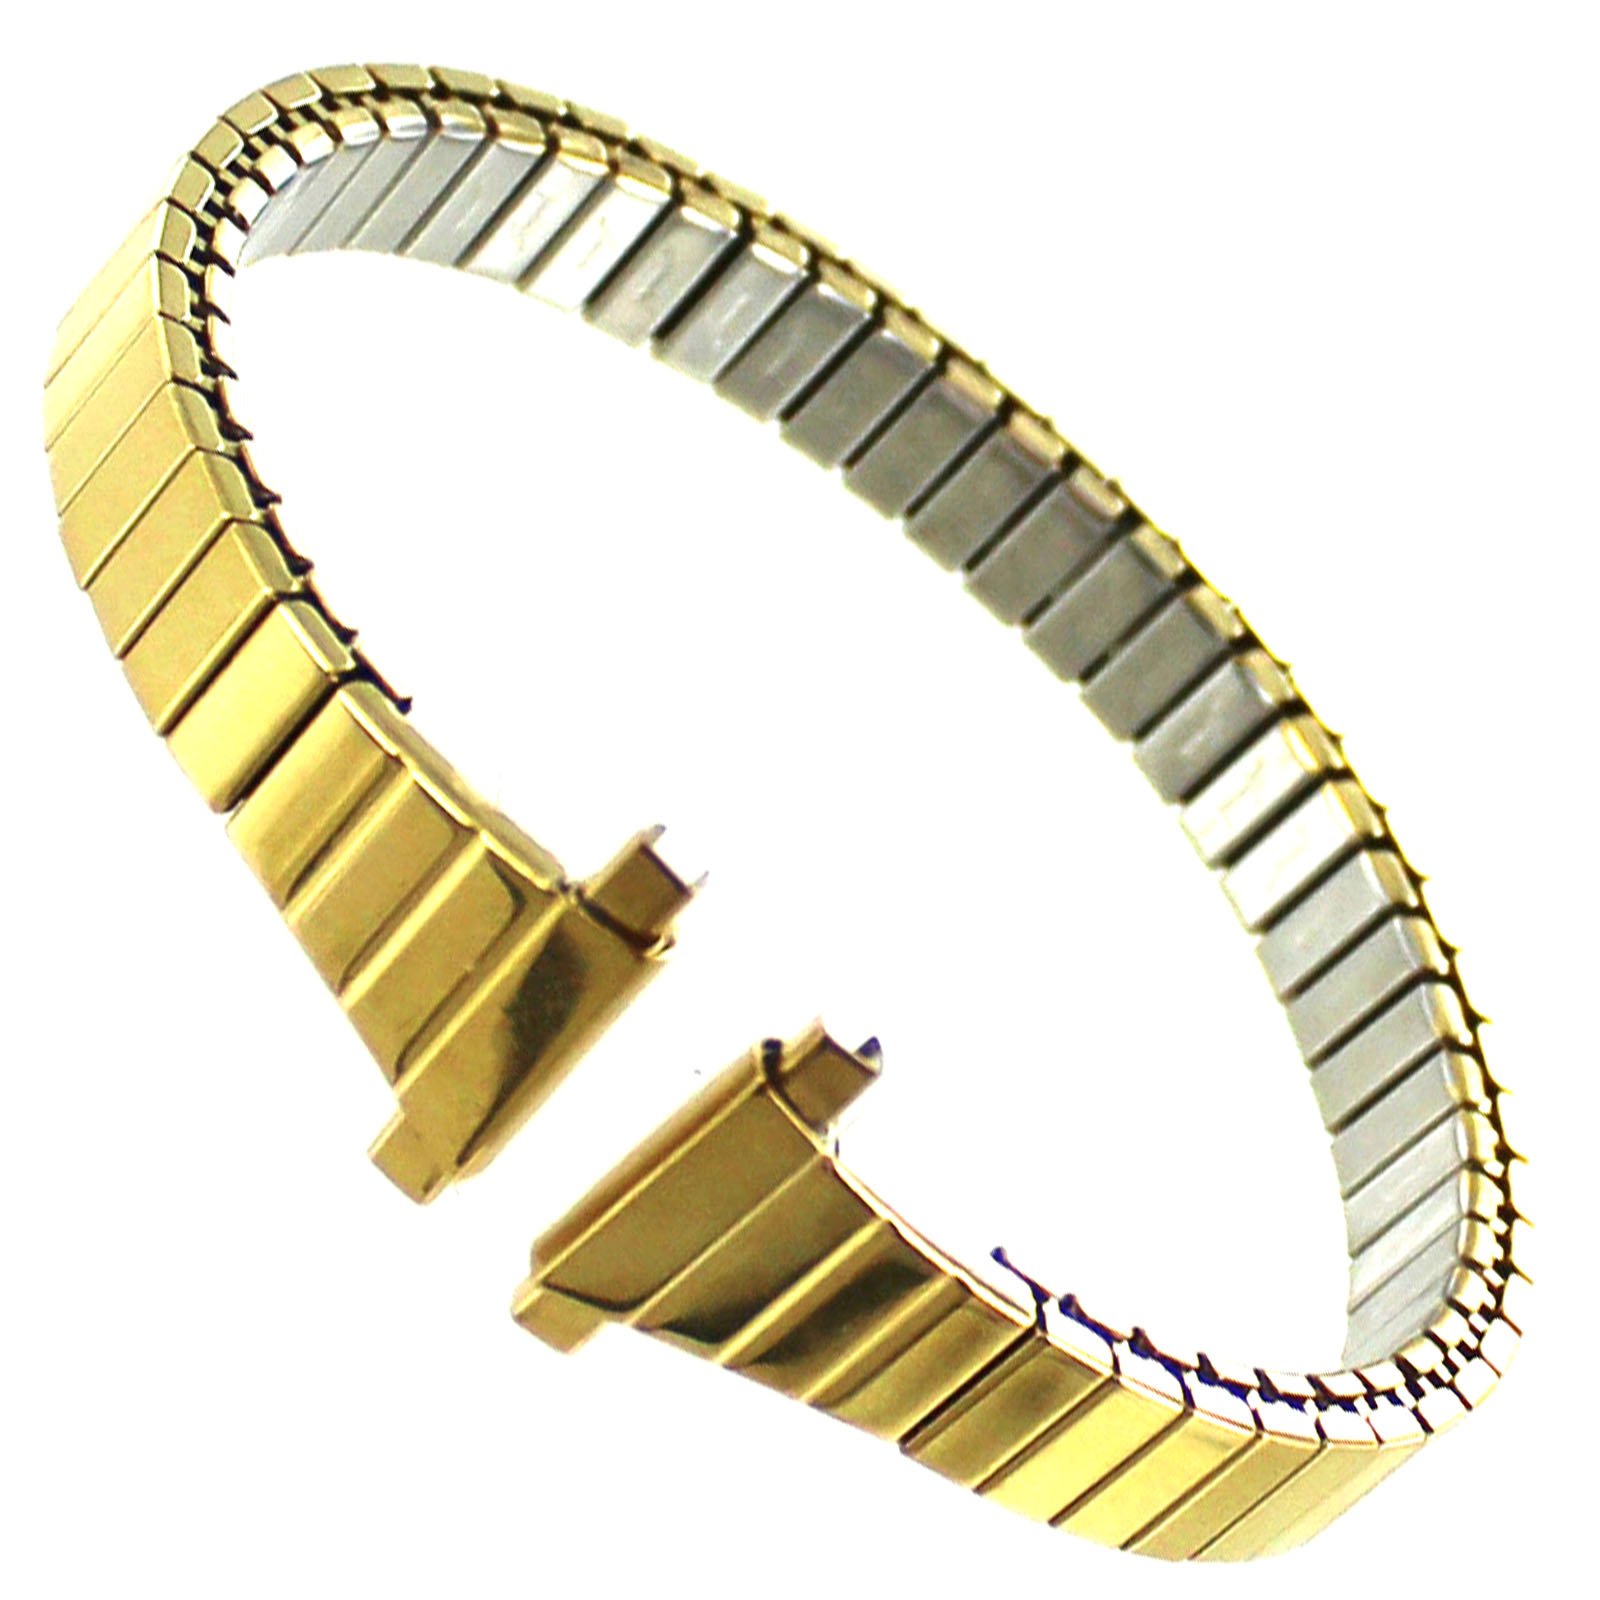 10-14mm Speidel Gold Tone Stainless Steel Ladies Expansion Band 717/33 XL